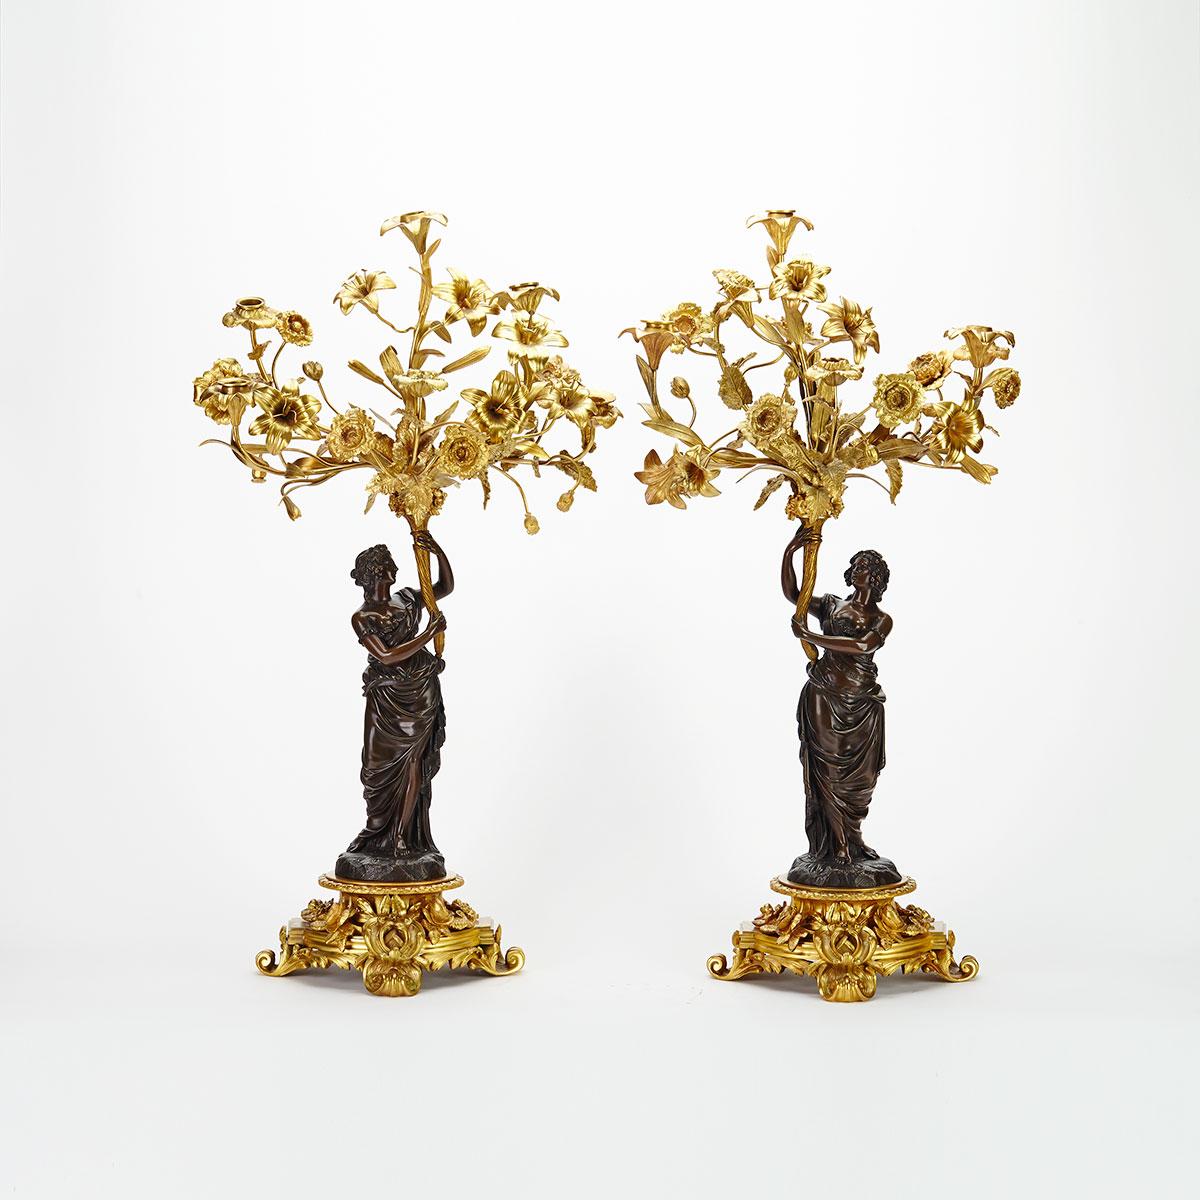 Pair of French Gilt and Patinated Bronze Figural Candelabra, early 20th century